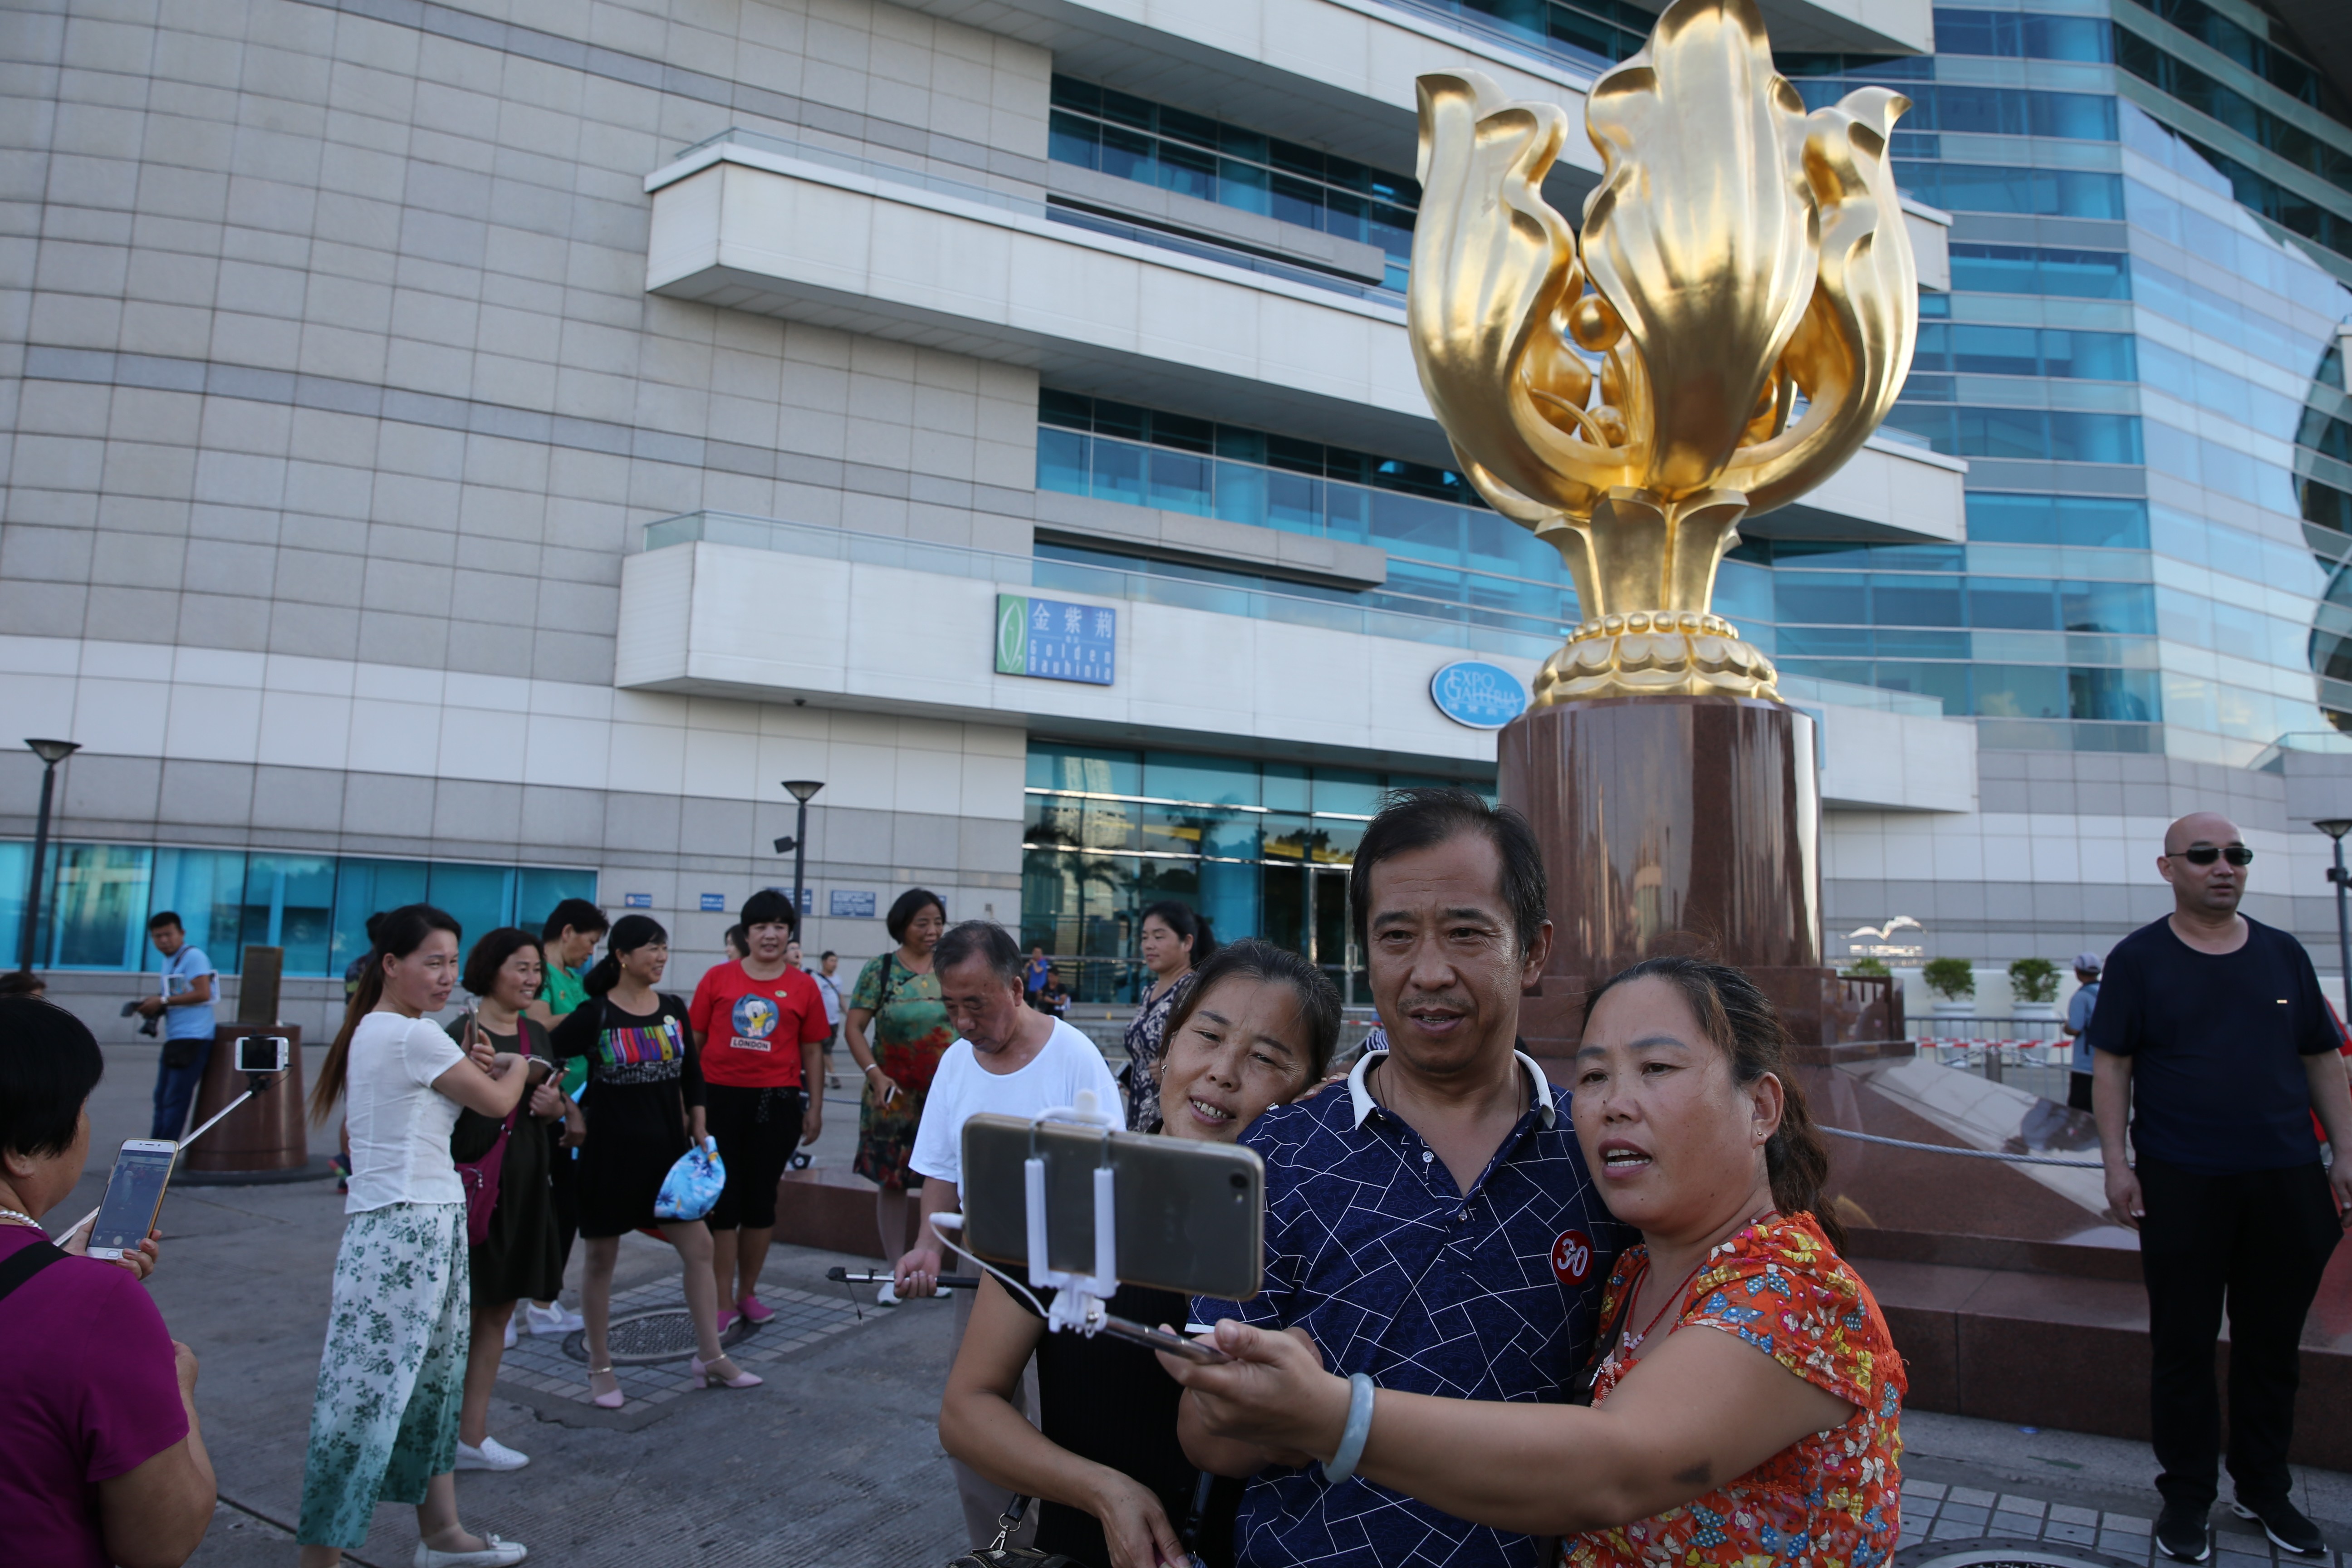 More mainlanders are spending the ‘golden week’ in Hong Kong this year. Photo: Sam Tsang